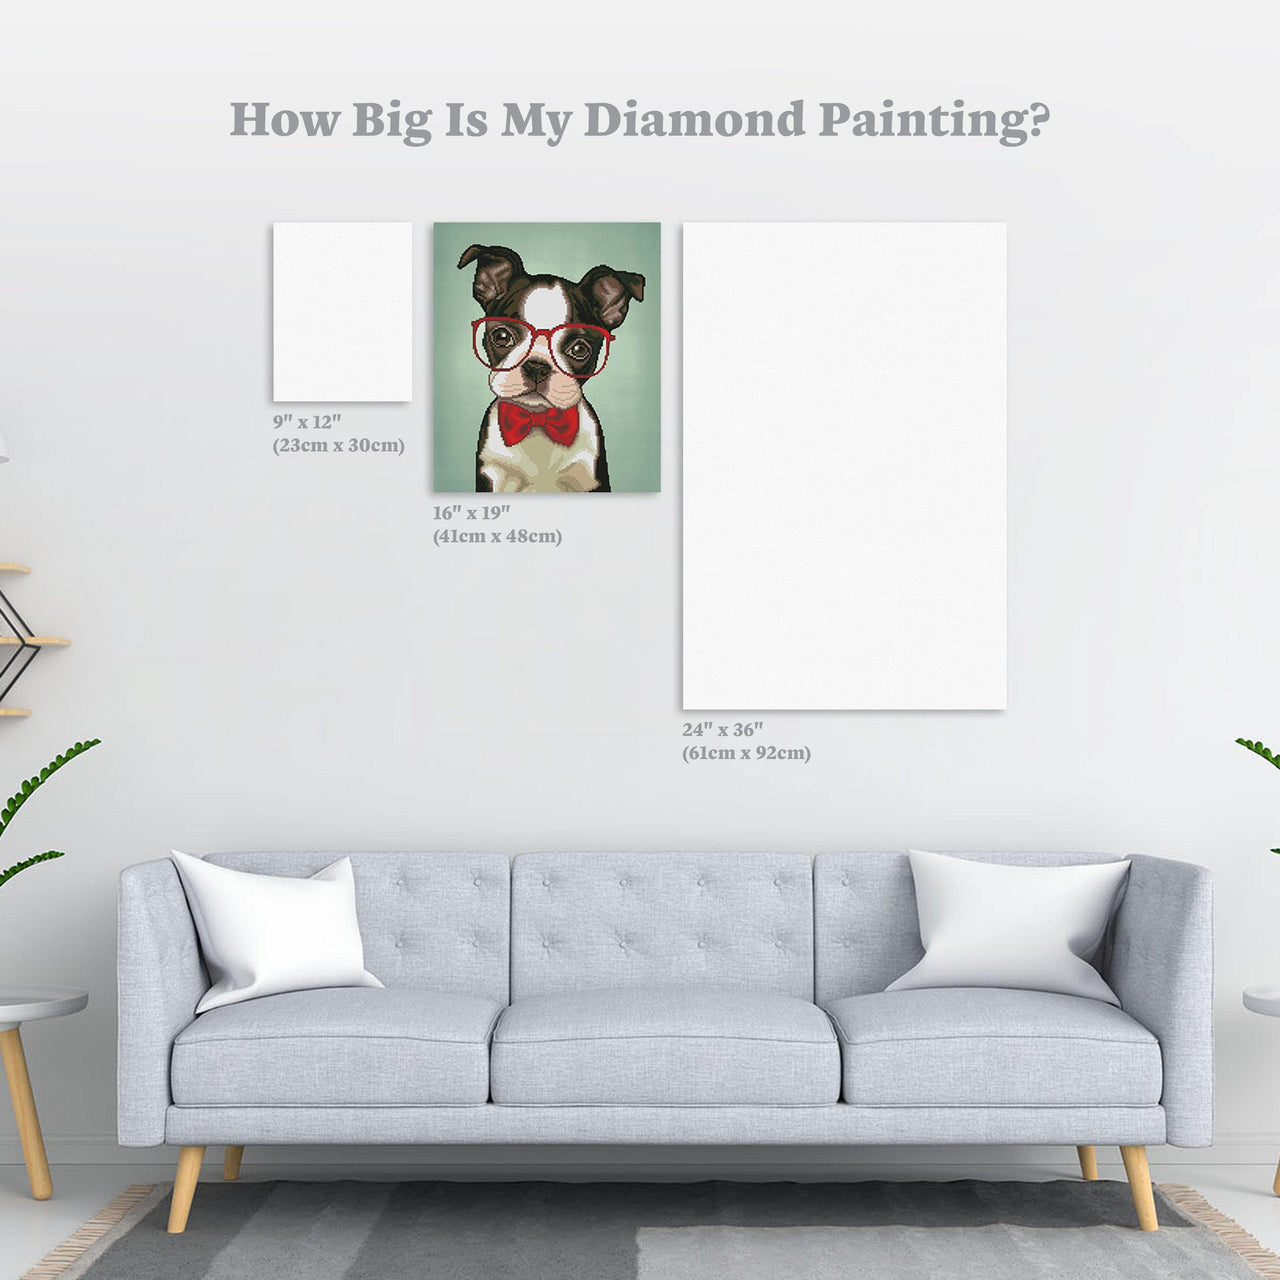 Diamond Painting Hipster Boston Terrier 16" x 19″ (41cm x 48cm) / Round with 18 Colors including 1 AB